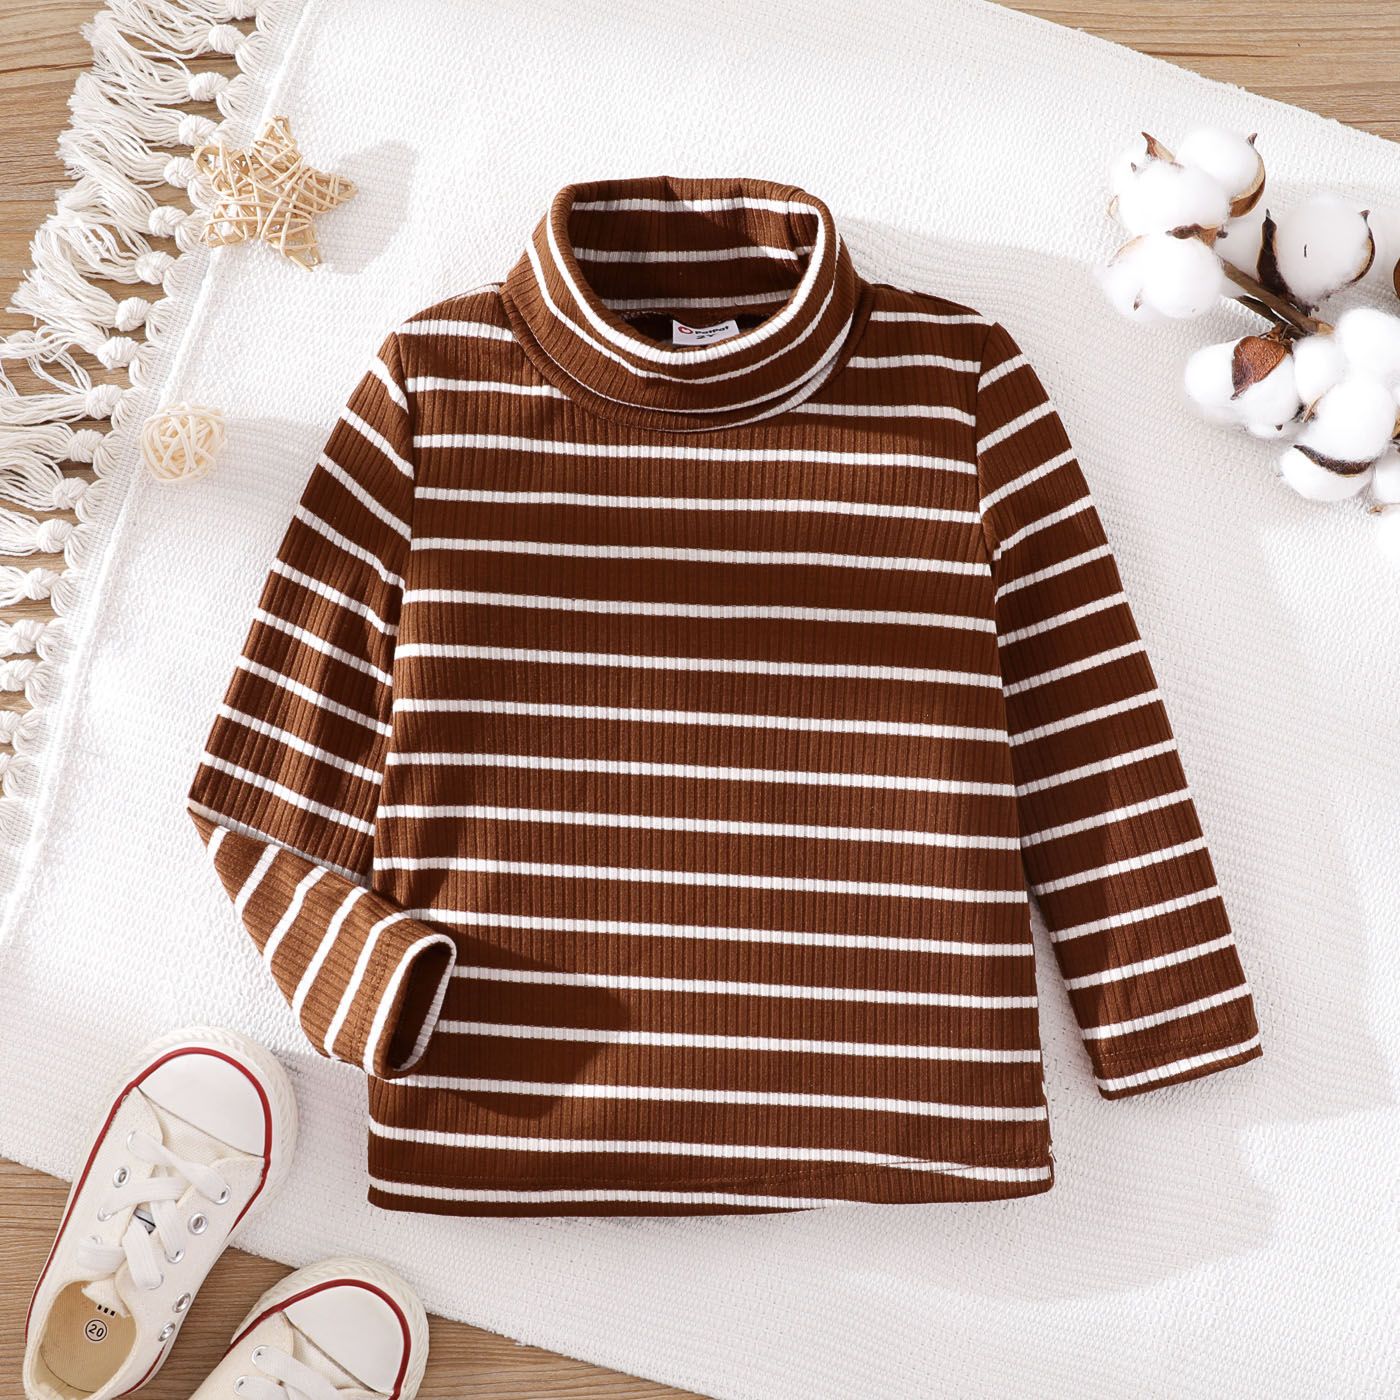 Toddler Girl/Boy Striped Casual Top With Stand Collar